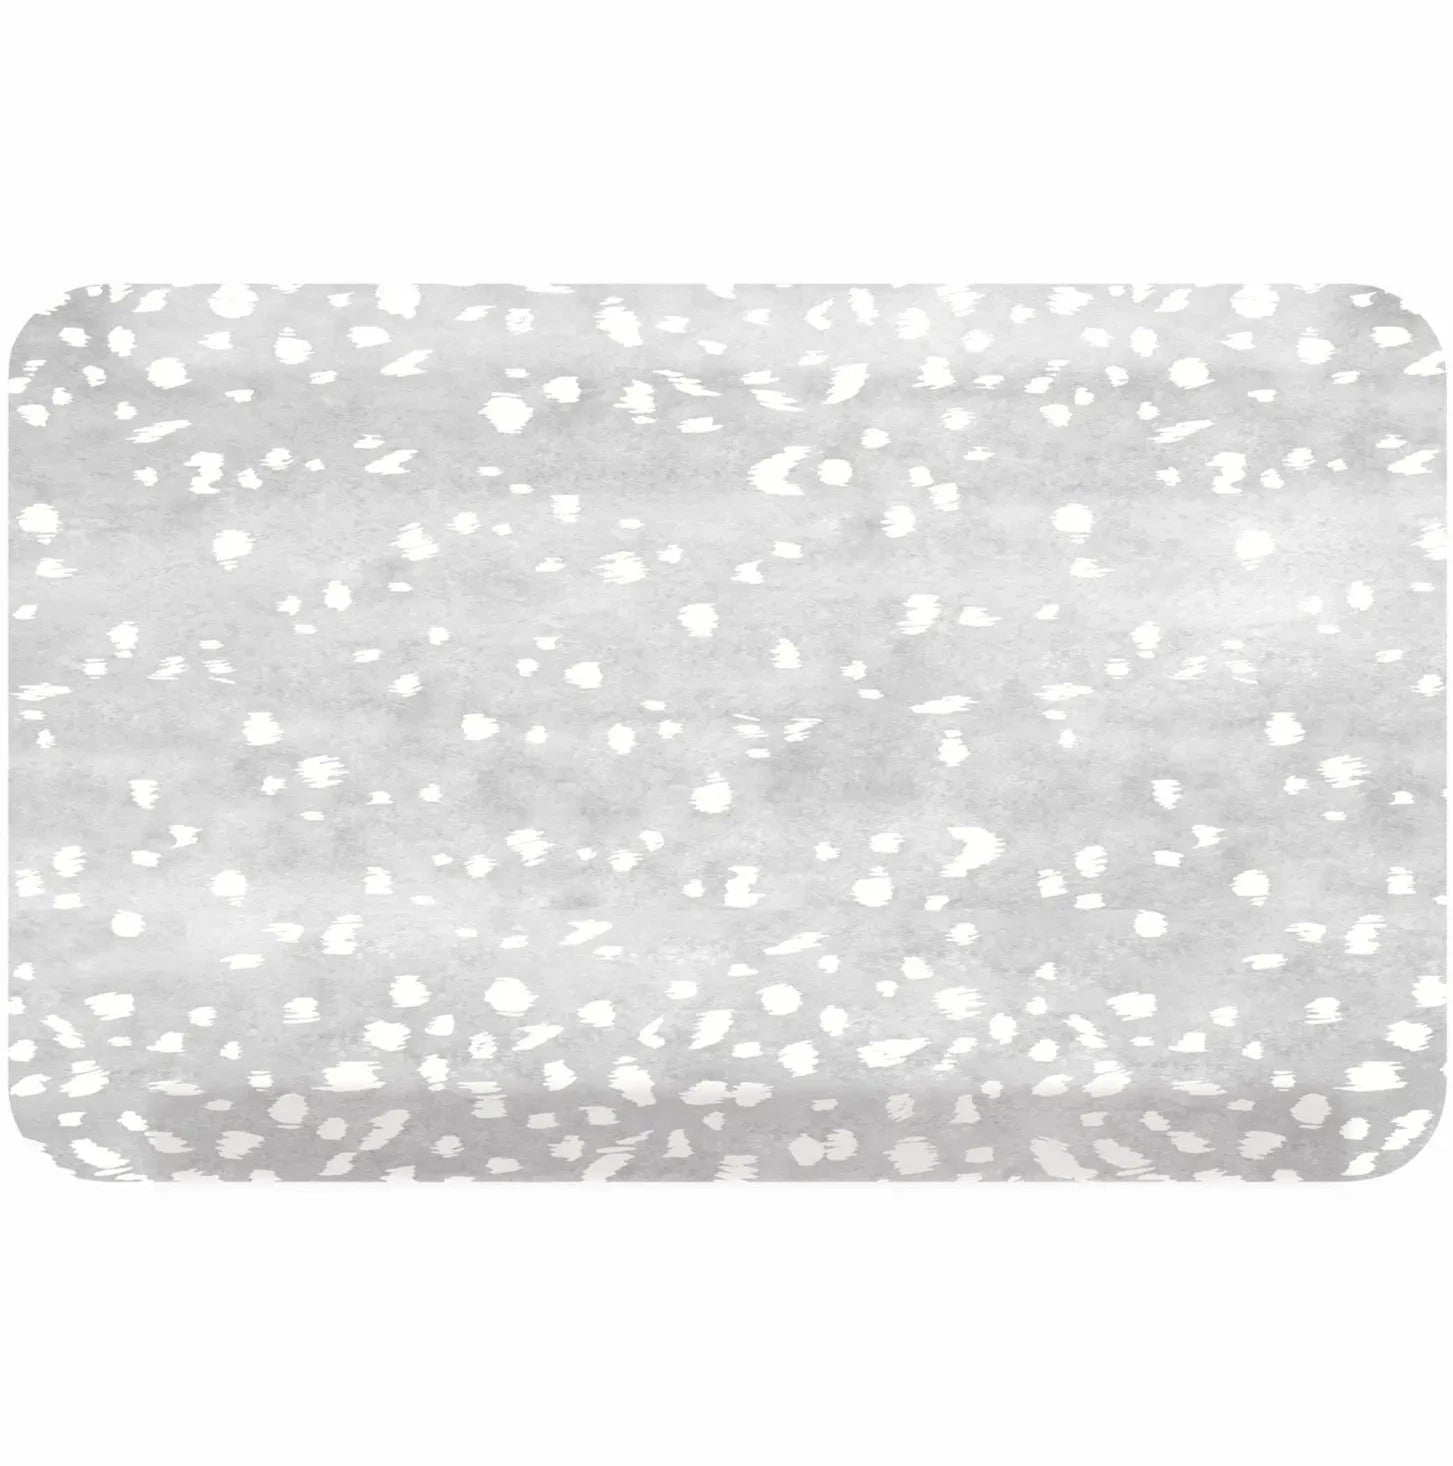 Fawn silver gray animal print kitchen mat shown in size 22x36